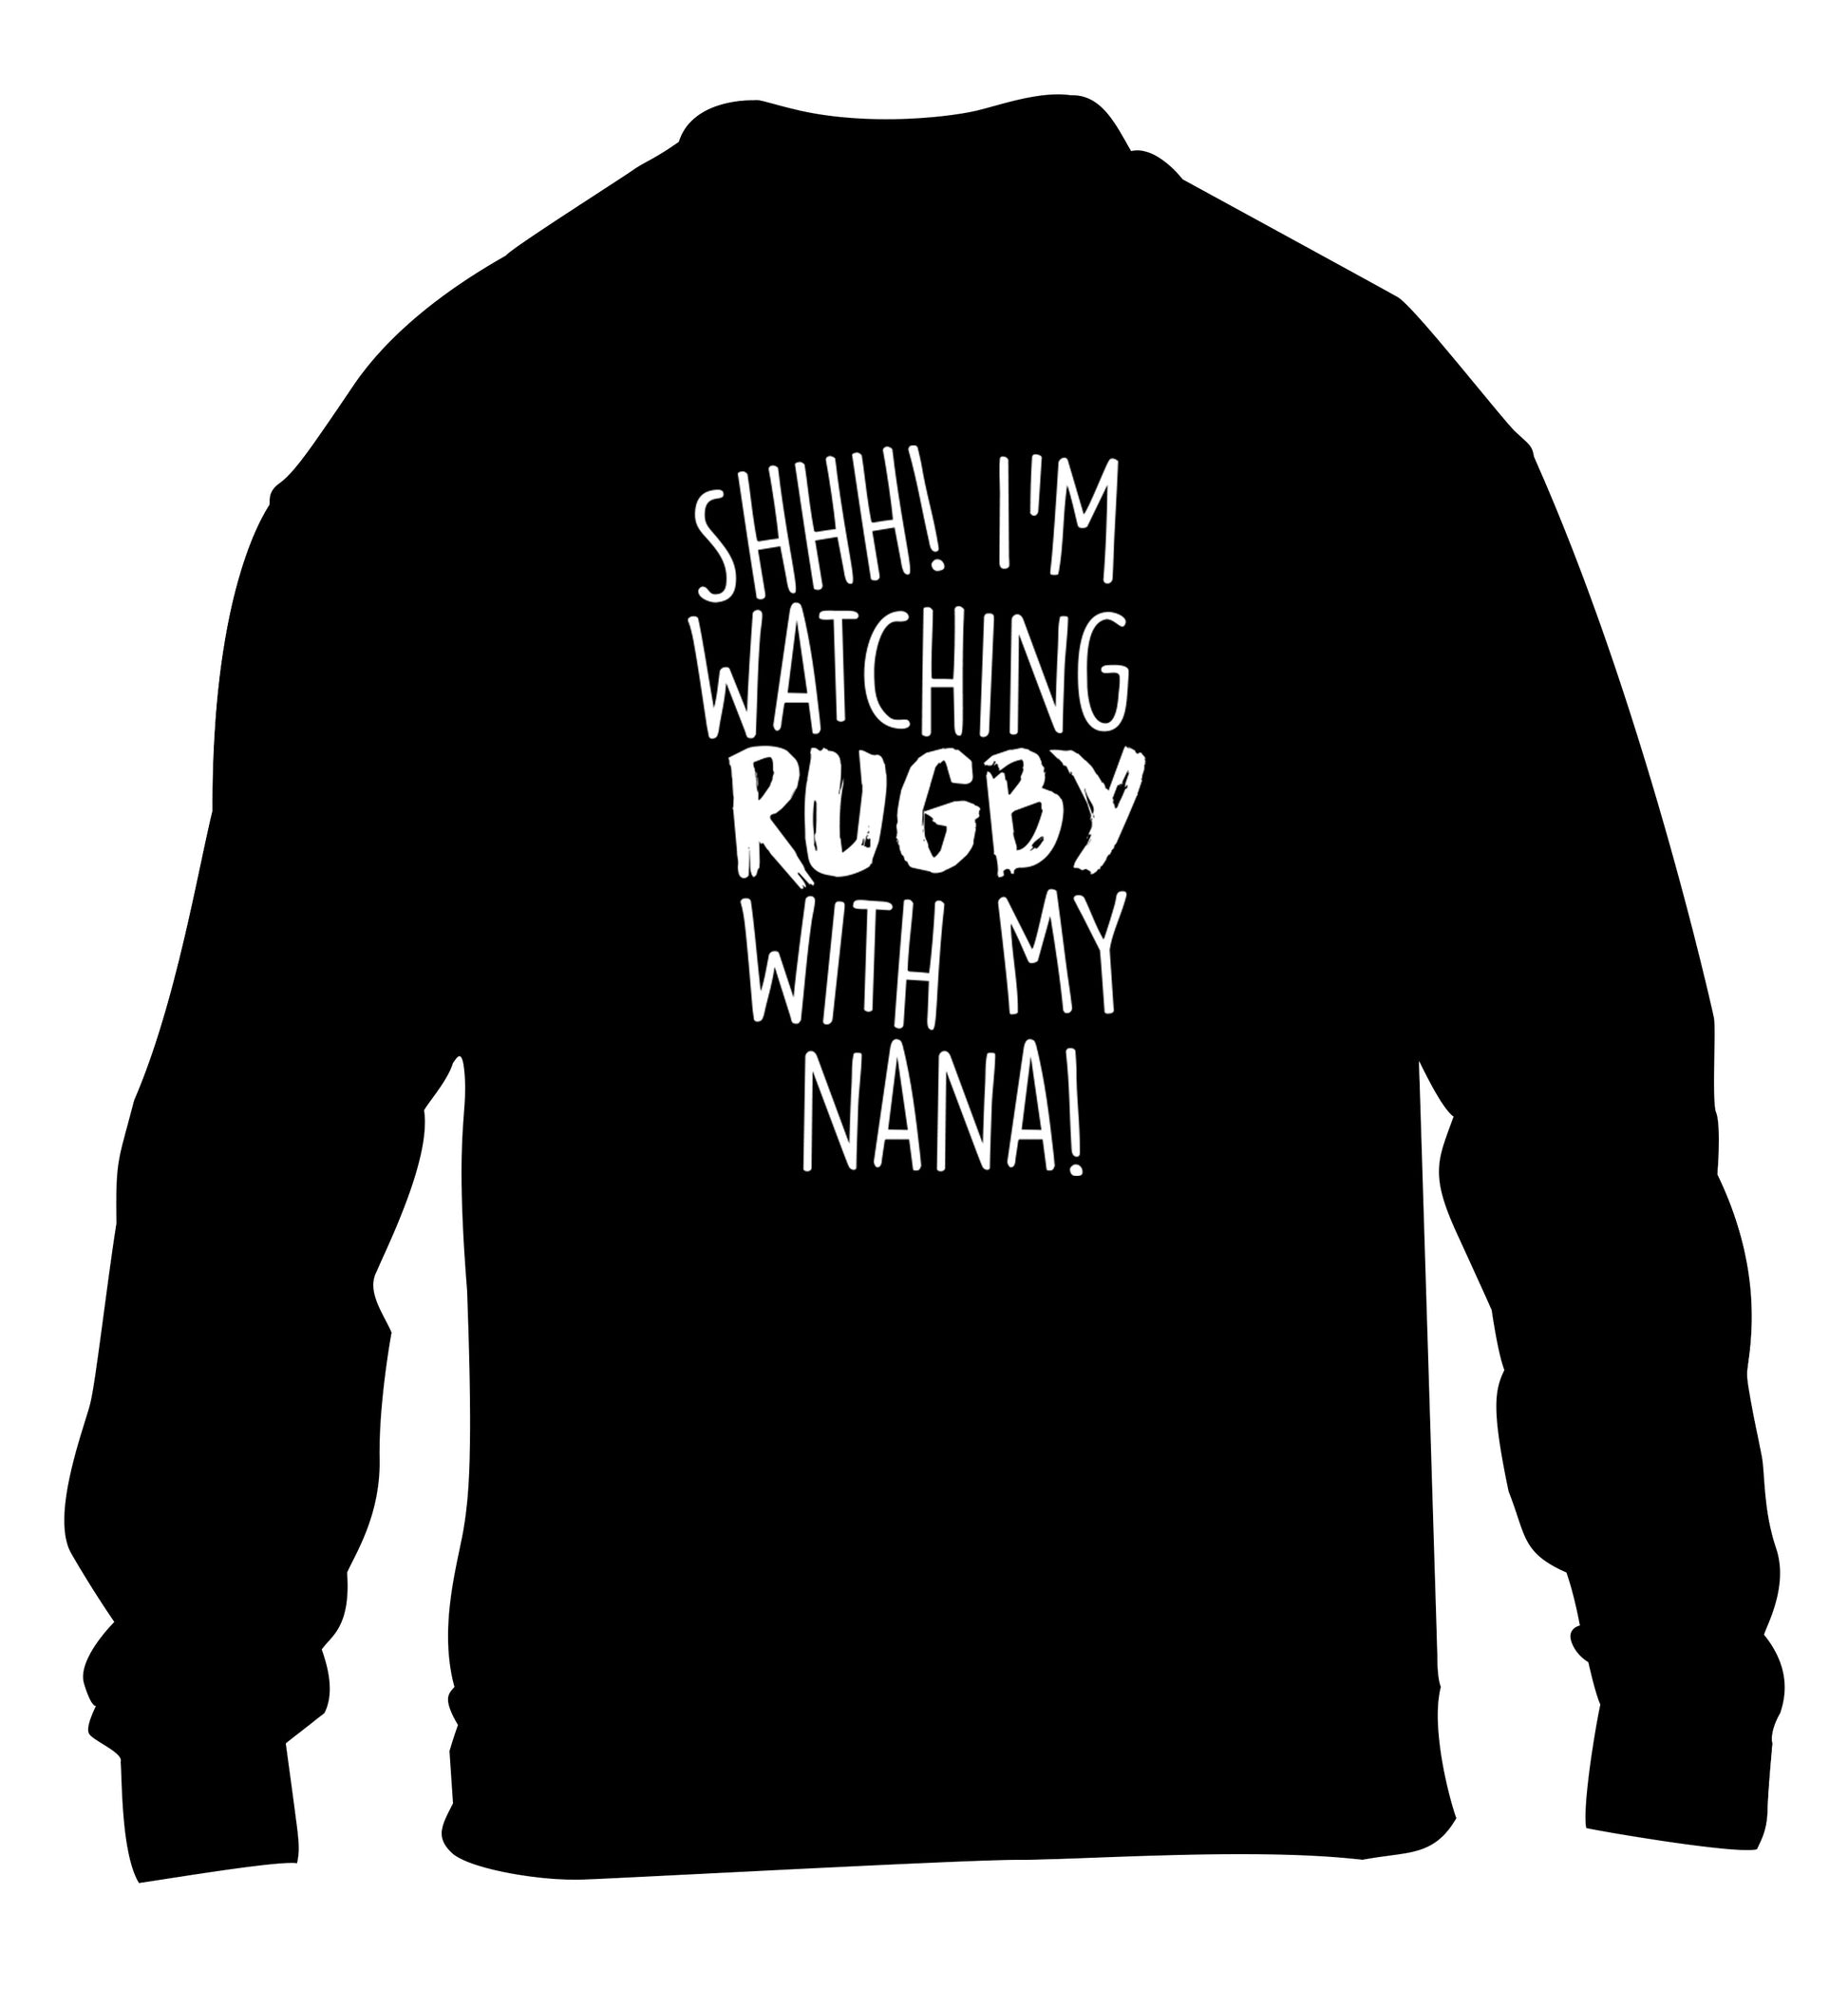 Shh I'm watching rugby with my nana children's black sweater 12-13 Years